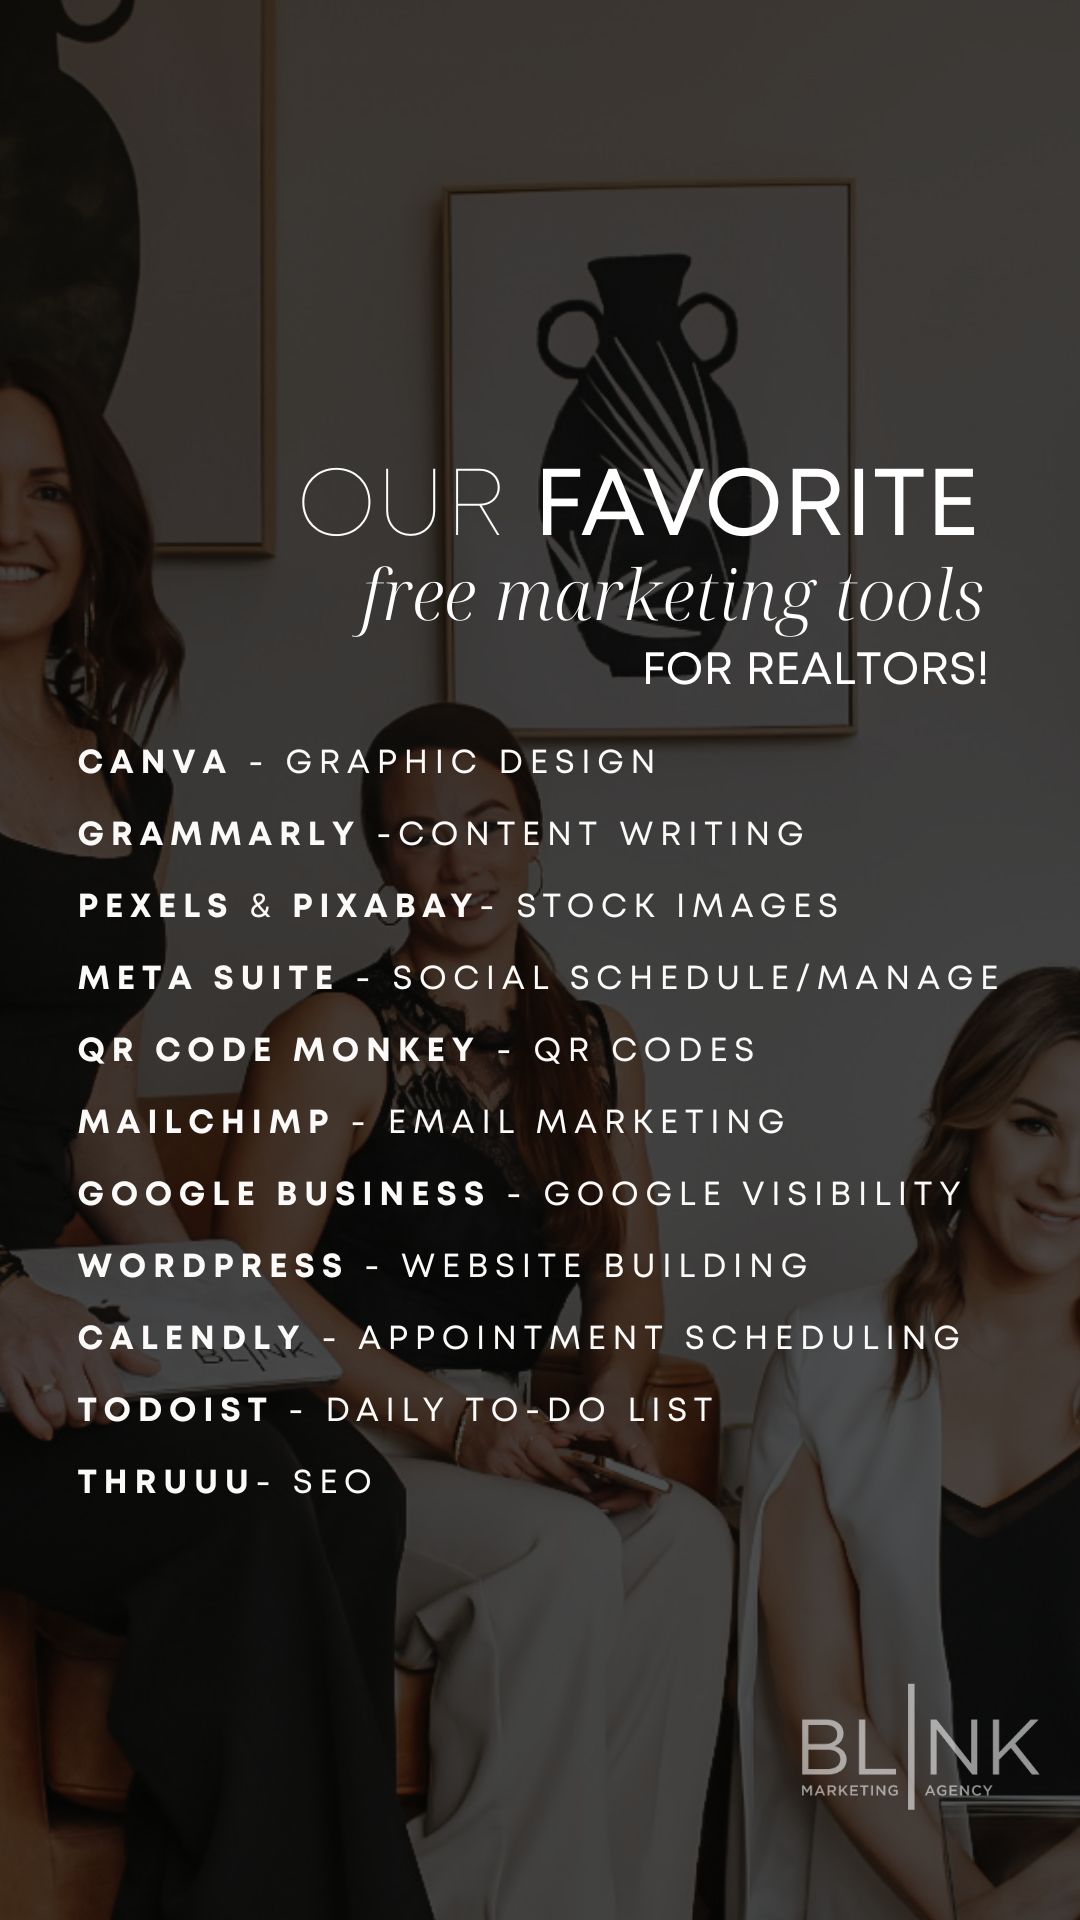 The ultimate list of free realtor marketing tools for real estate agents